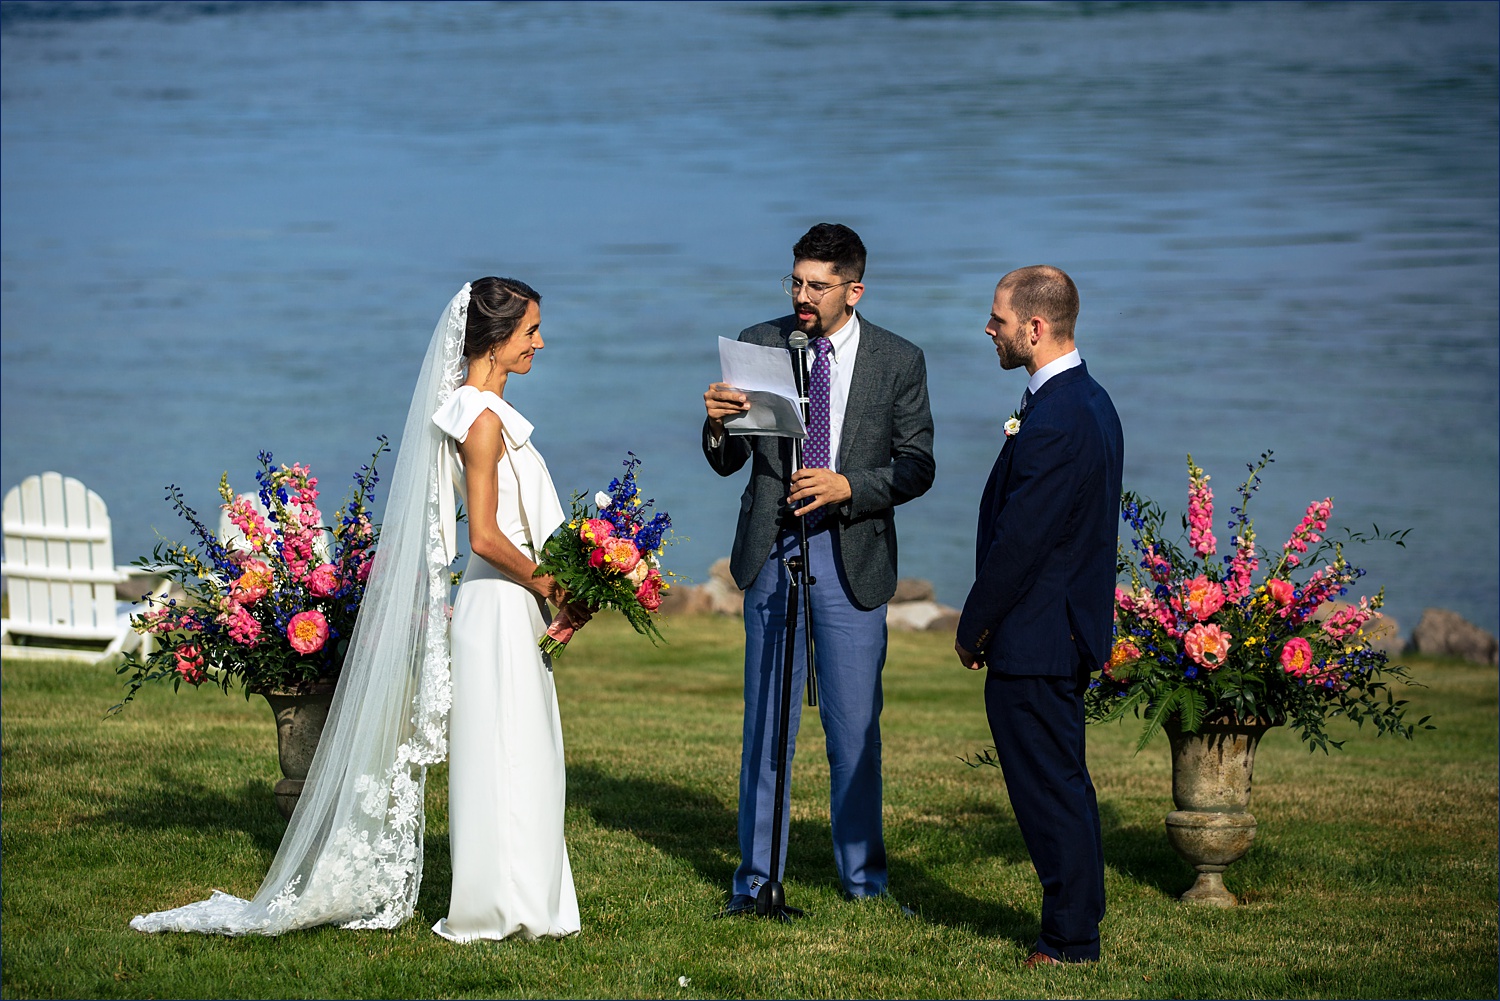 The couple and their friend the officiant during their outdoor southern Maine wedding ceremony